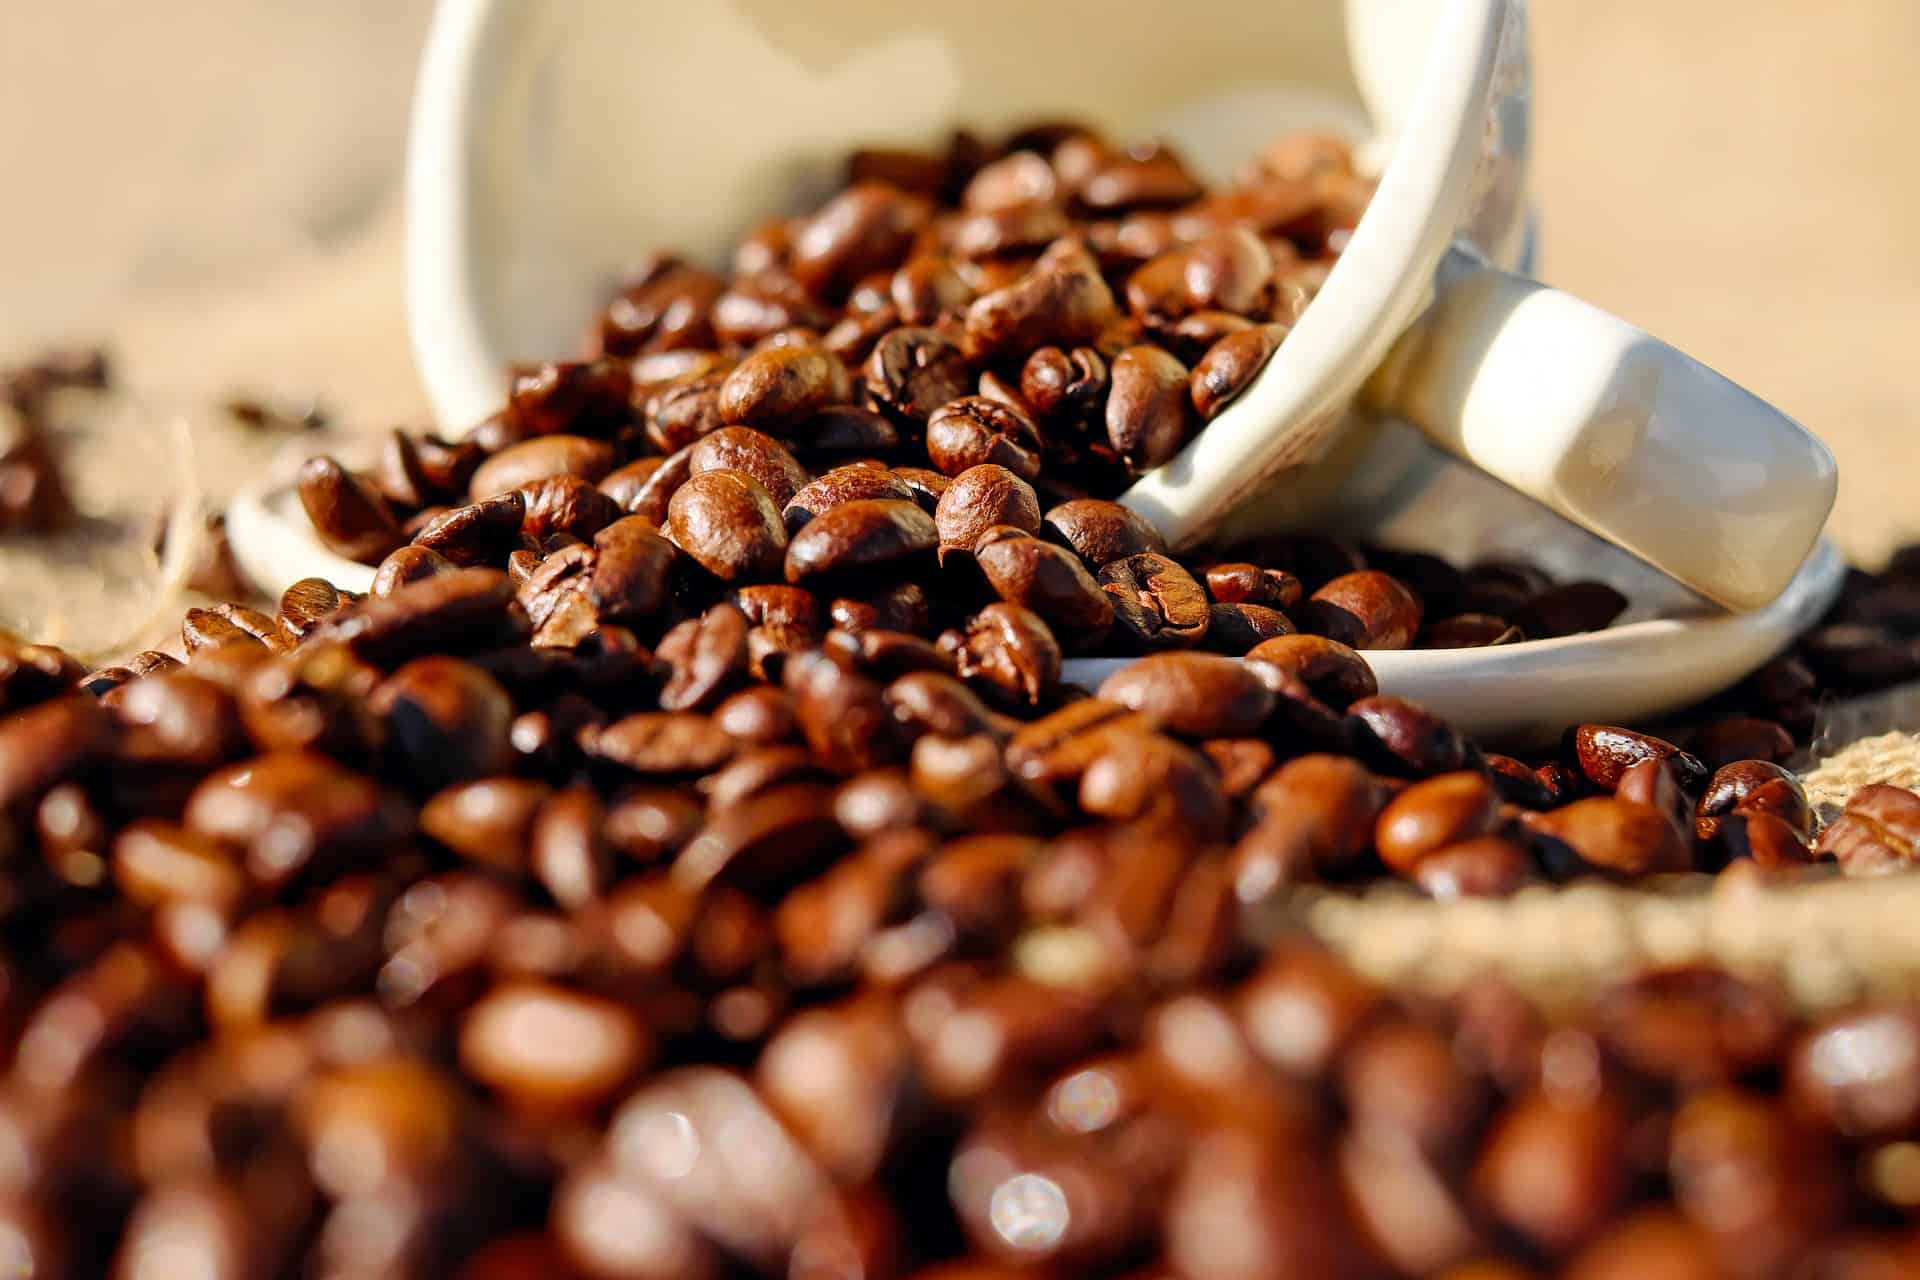 Coffee beans spilling from a cup - What are the health benefits of coffee?